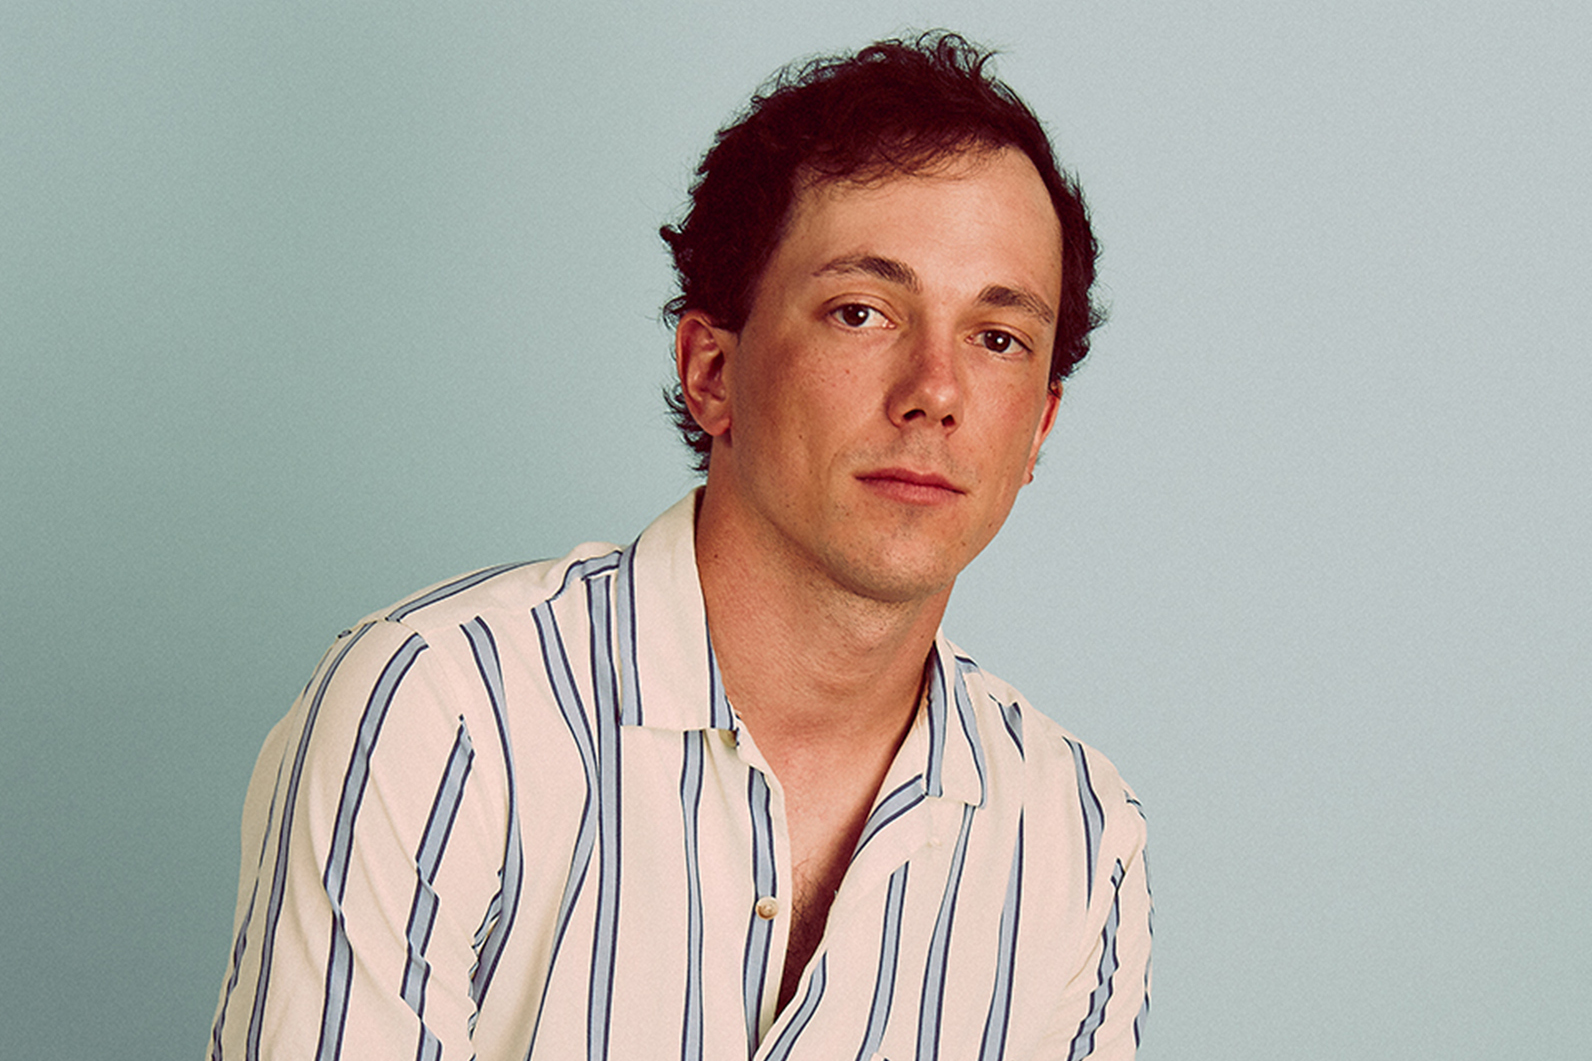 Owen Danoff Reminisces About Family On “Wax Museum”